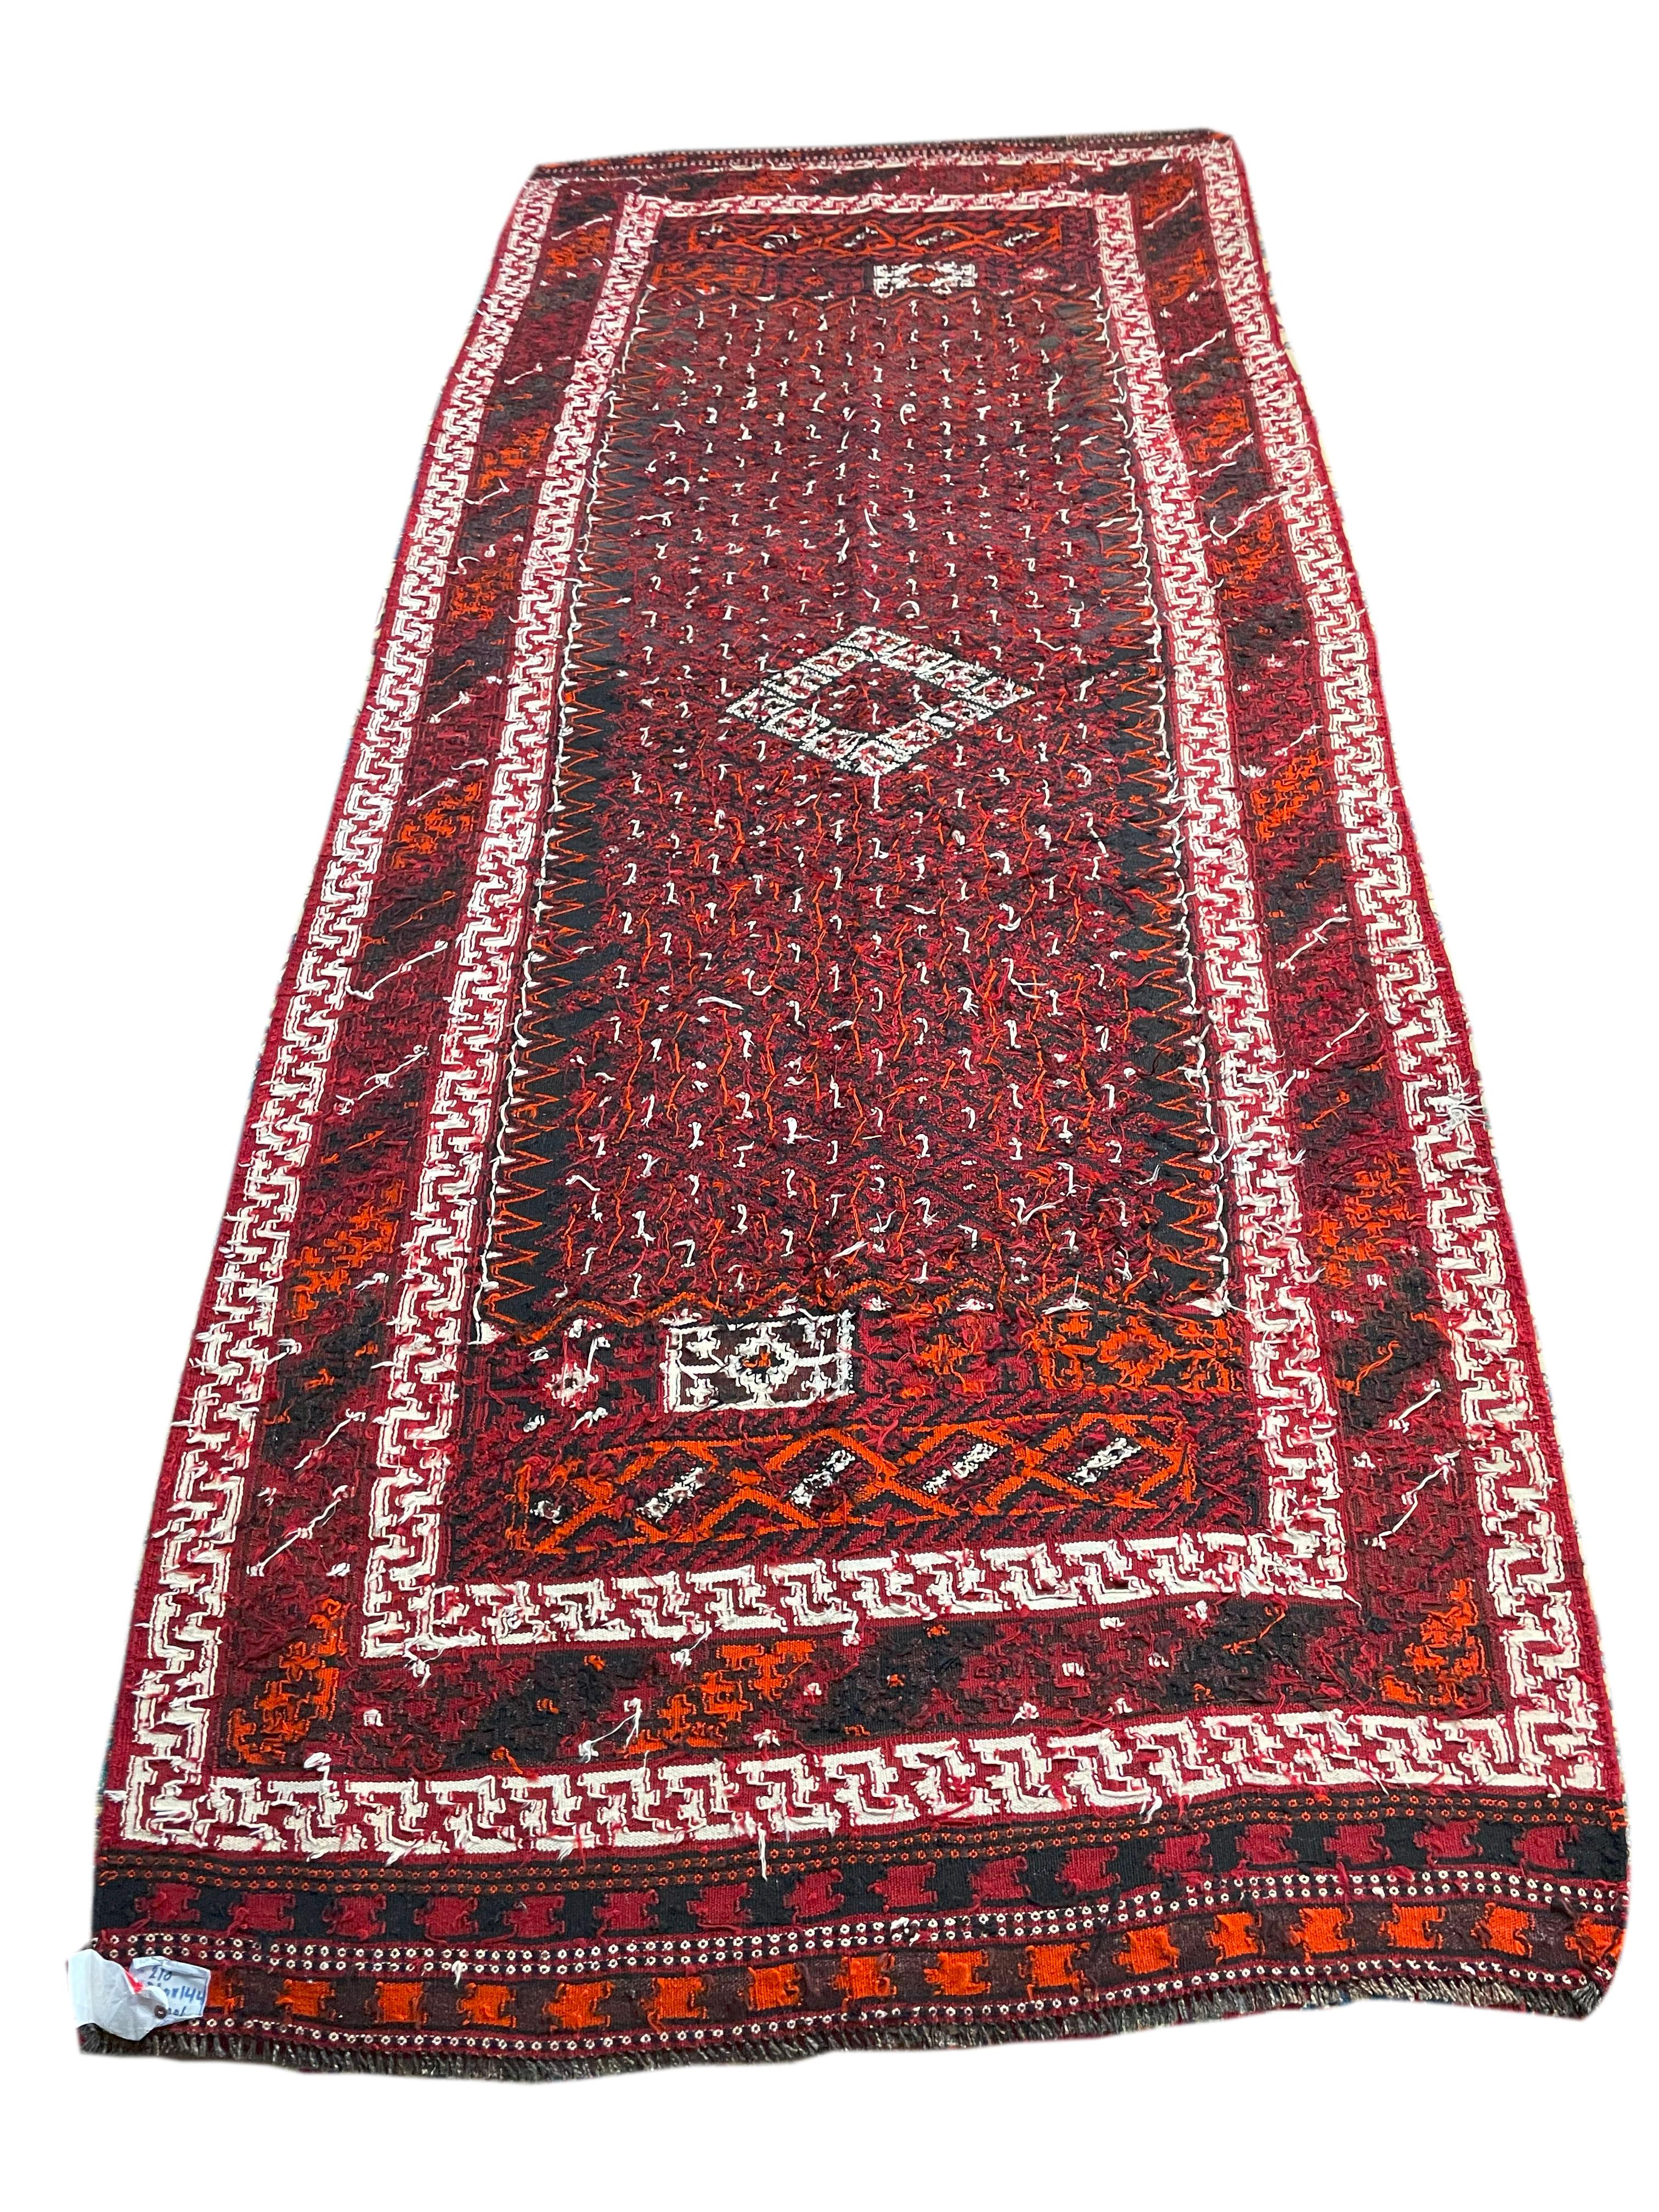 Hand-Knotted 5'x12' Antique Balouci - Persian Flat Woven Kilim - Maroon For Sale